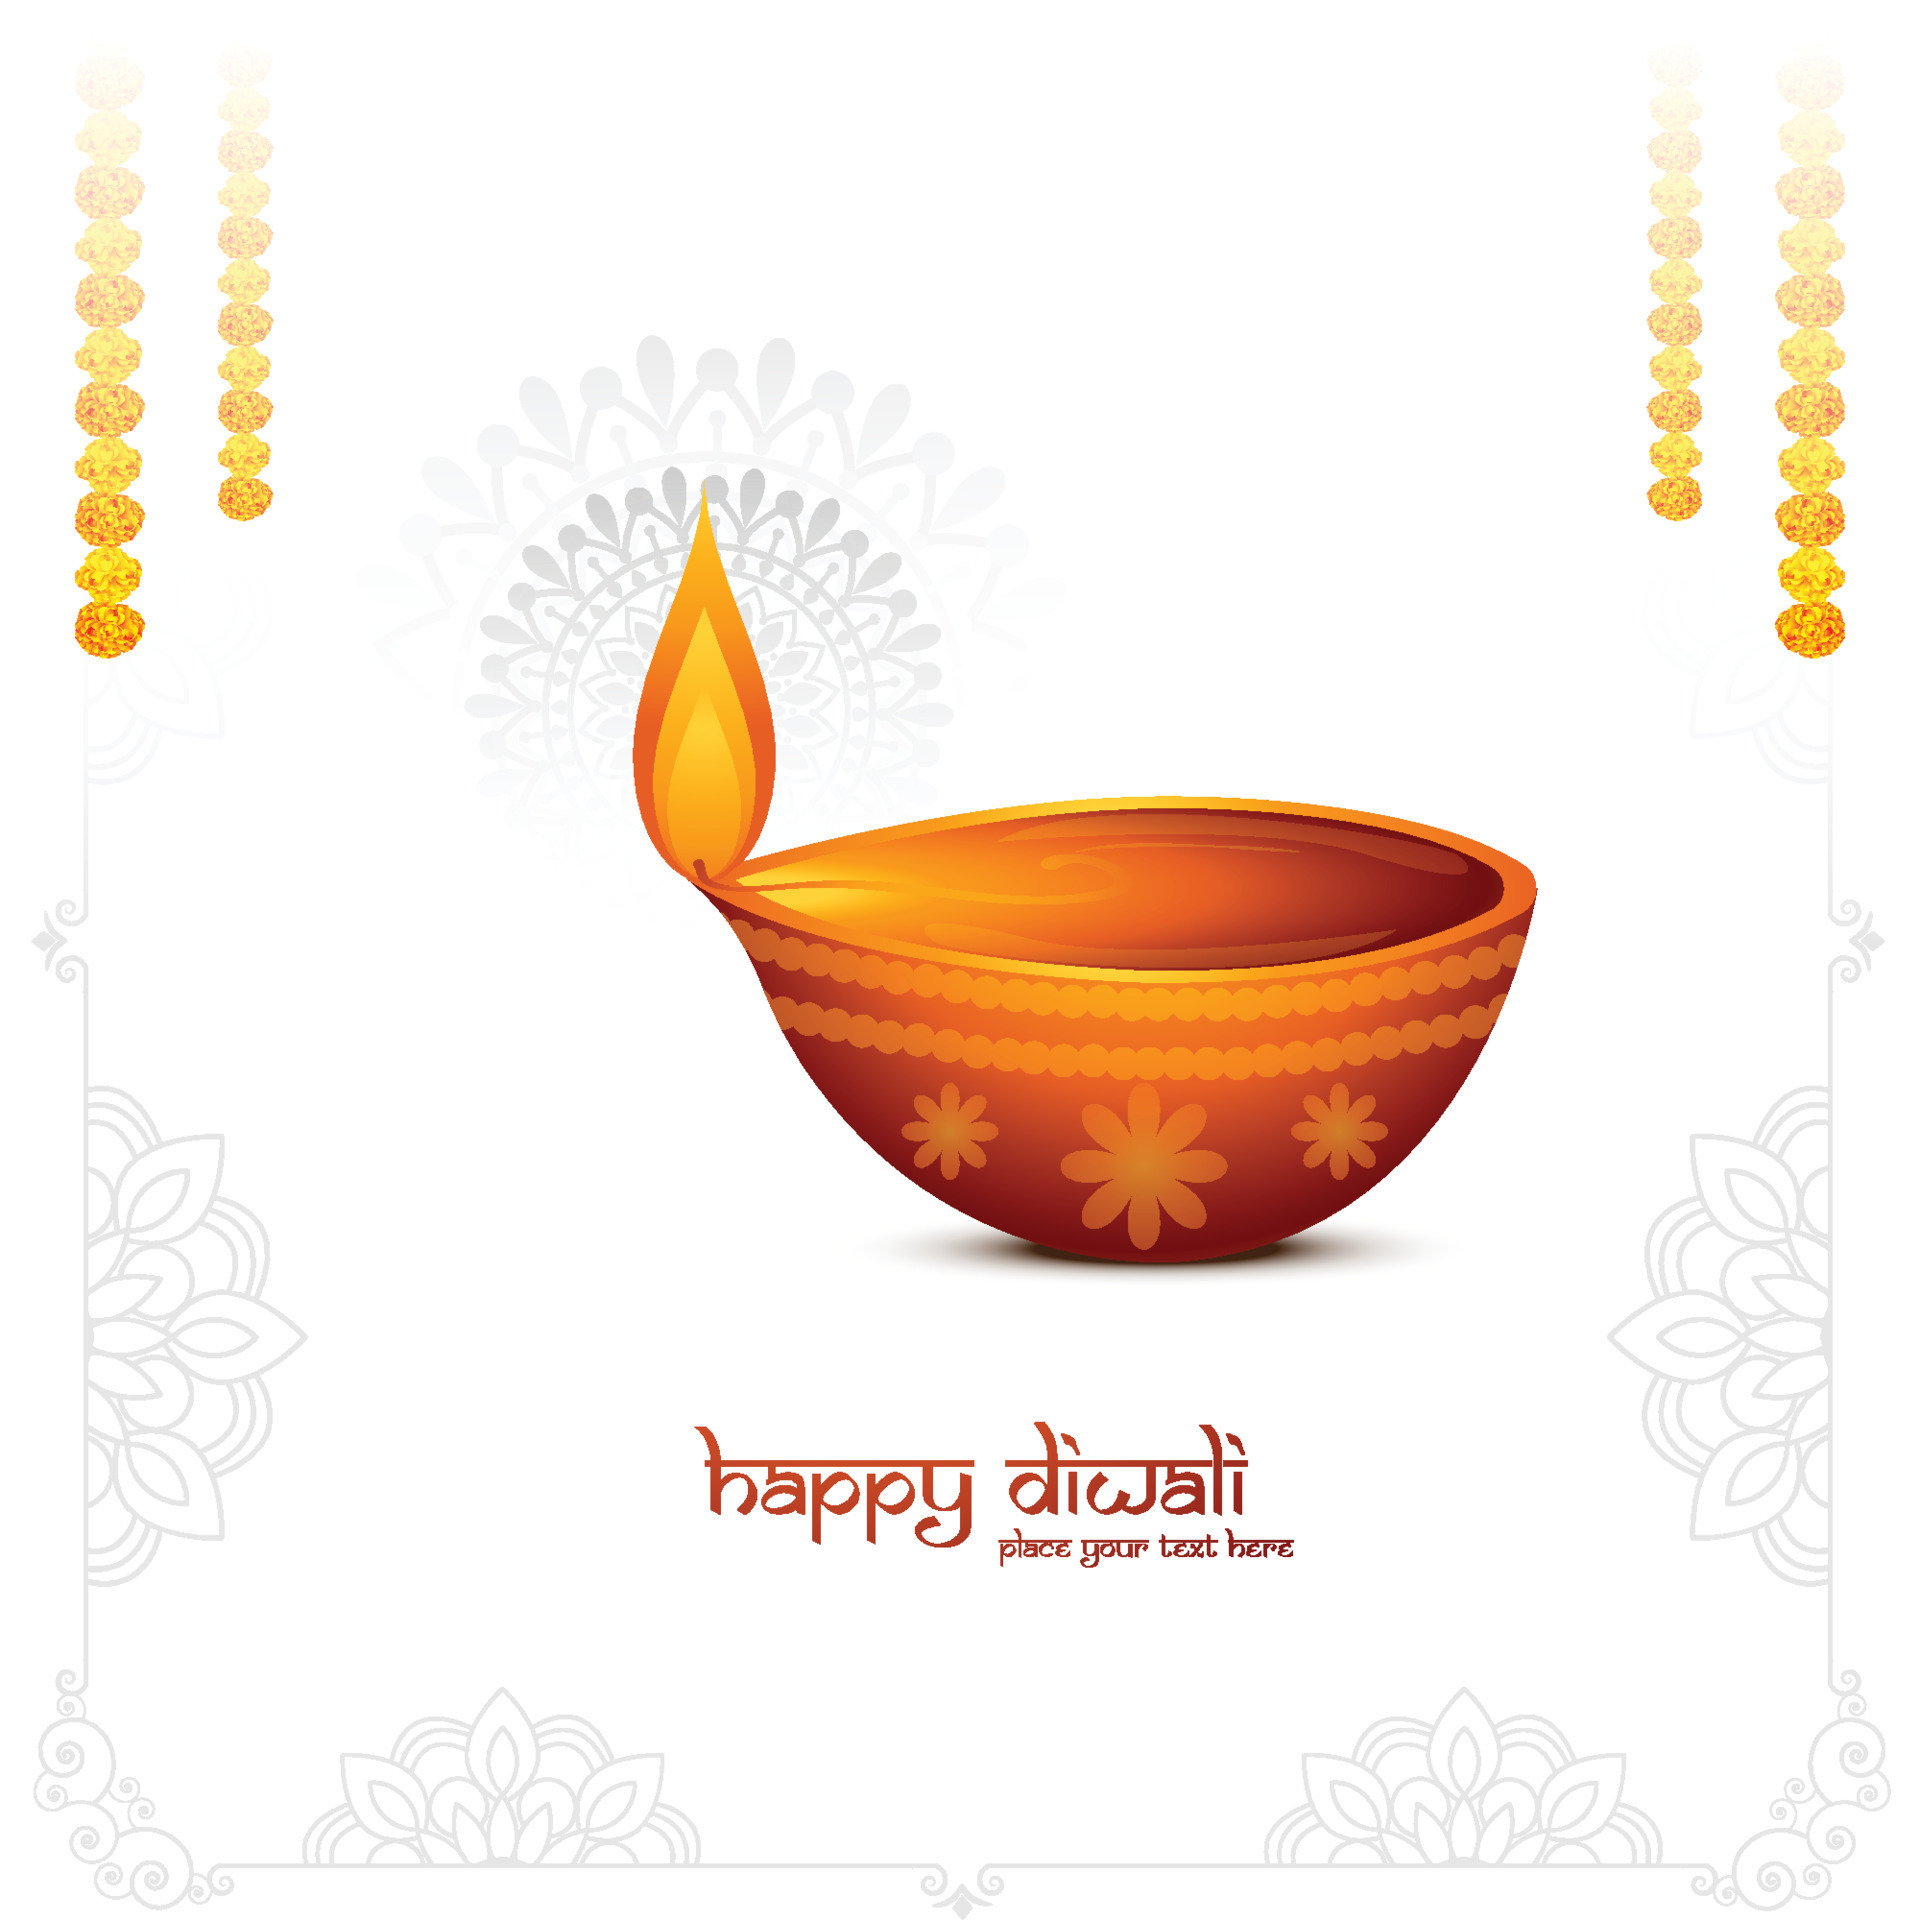 Diwali Greetings Backgrounds | Holiday, Orange, White, Yellow Templates |  Free PPT Grounds